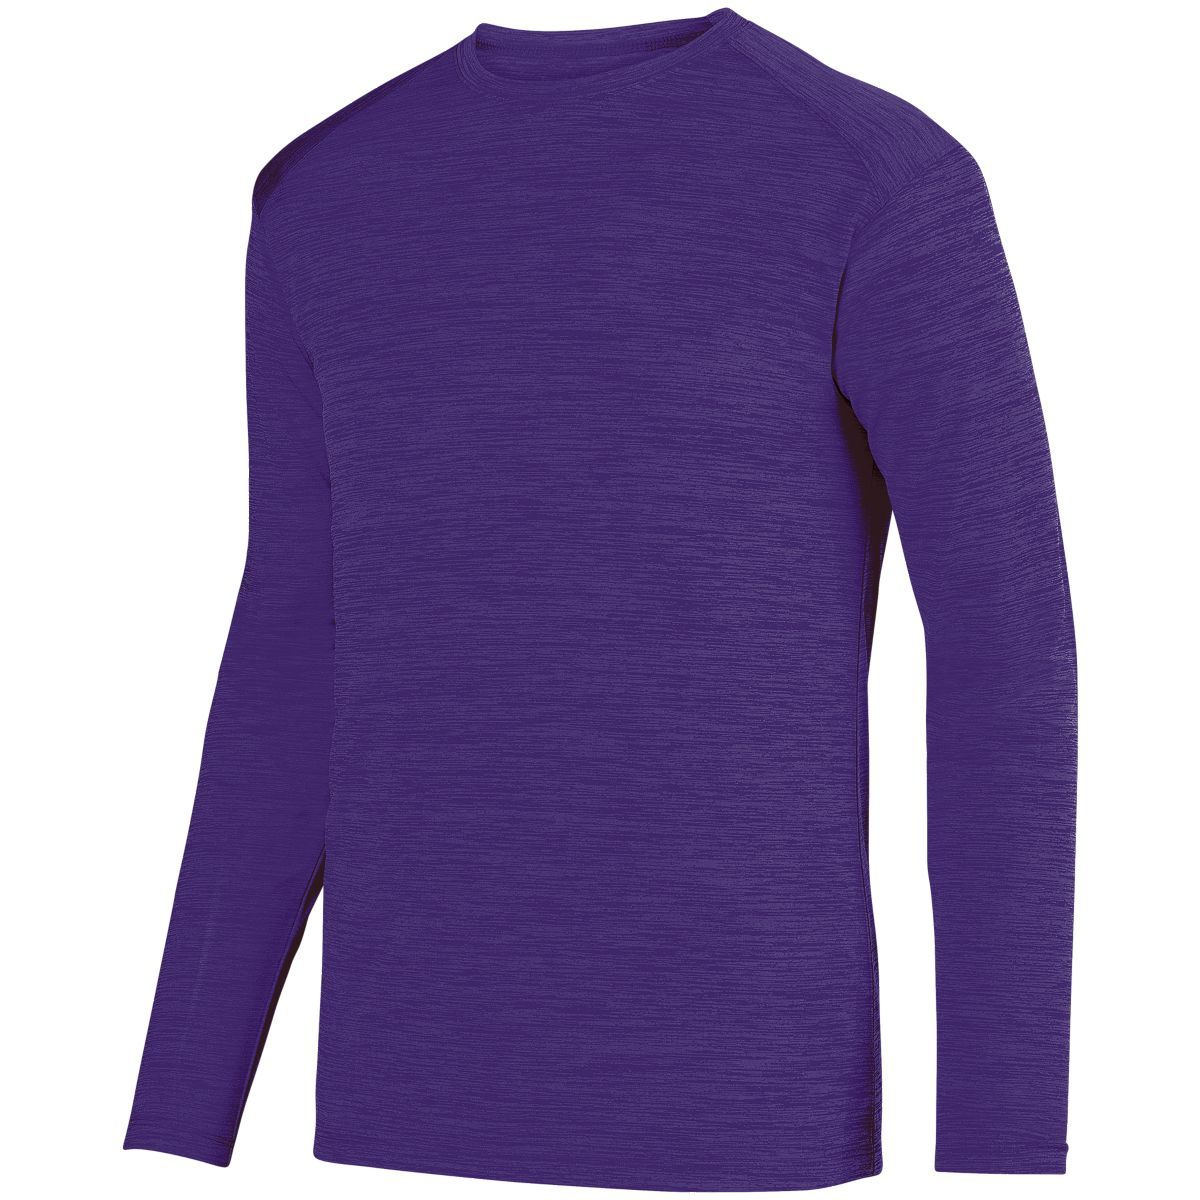 Augusta Sportswear Shadow Tonal Heather Long Sleeve Tee in Purple  -Part of the Adult, Adult-Tee-Shirt, T-Shirts, Augusta-Products, Shirts, Tonal-Fleece-Collection product lines at KanaleyCreations.com